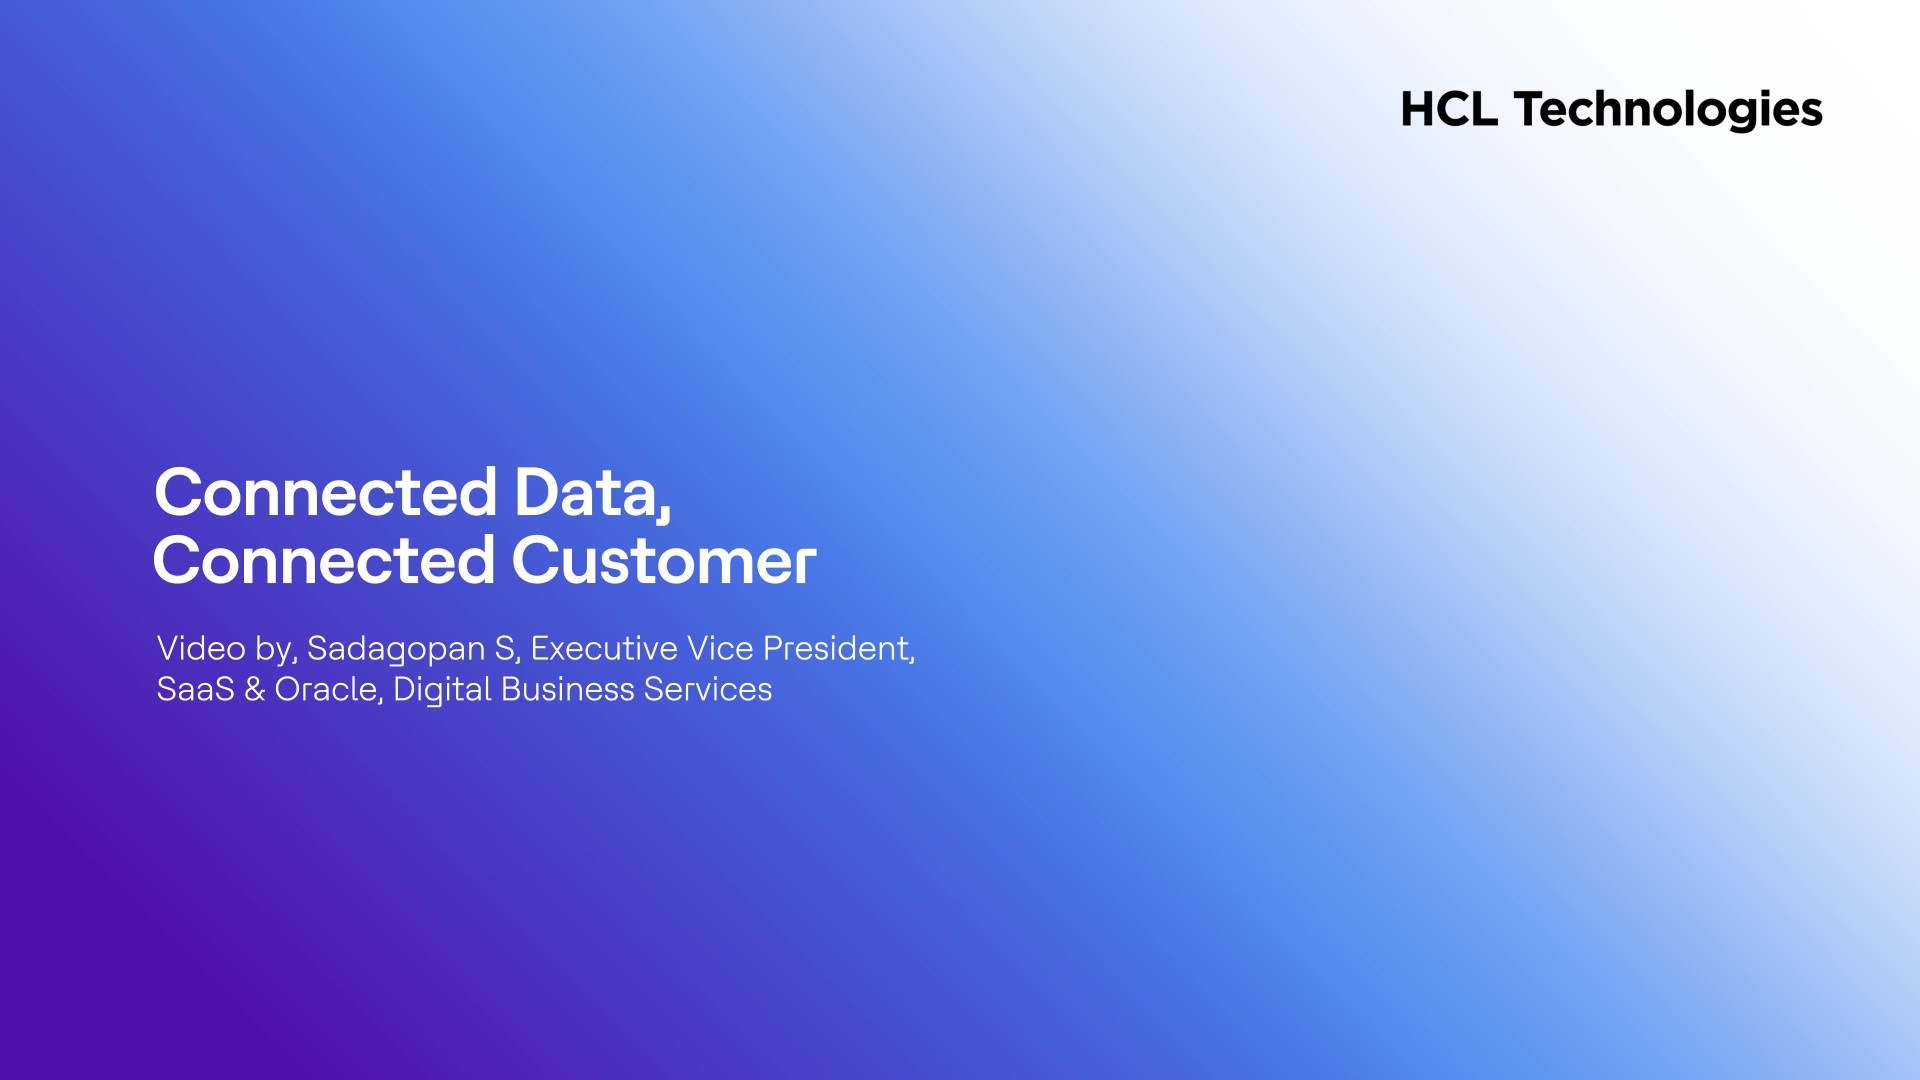 Connected Data, Connected Customer